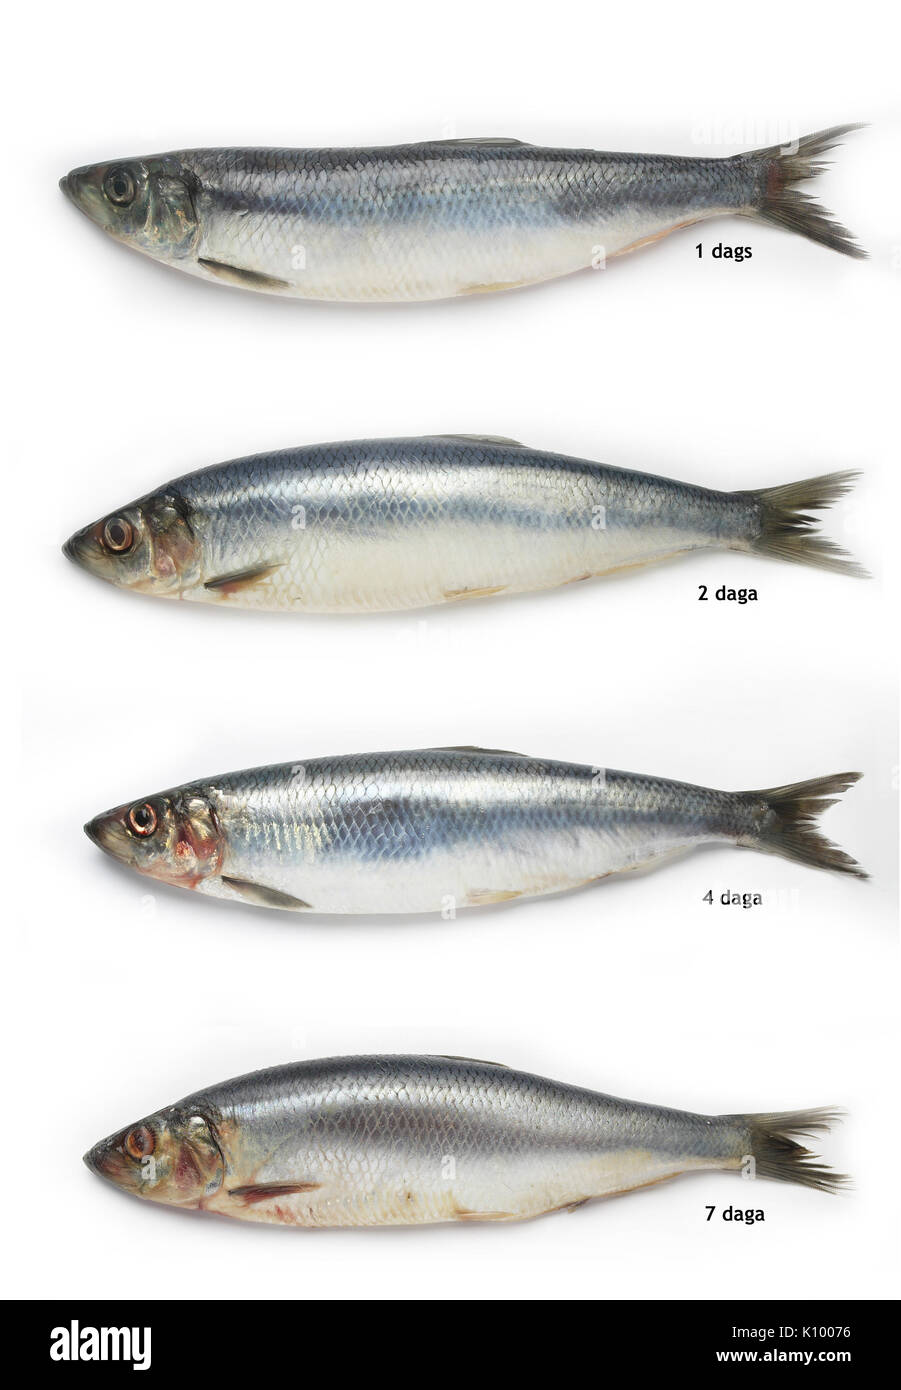 Herring illustrated from day 1 to day 7, Iceland Stock Photo